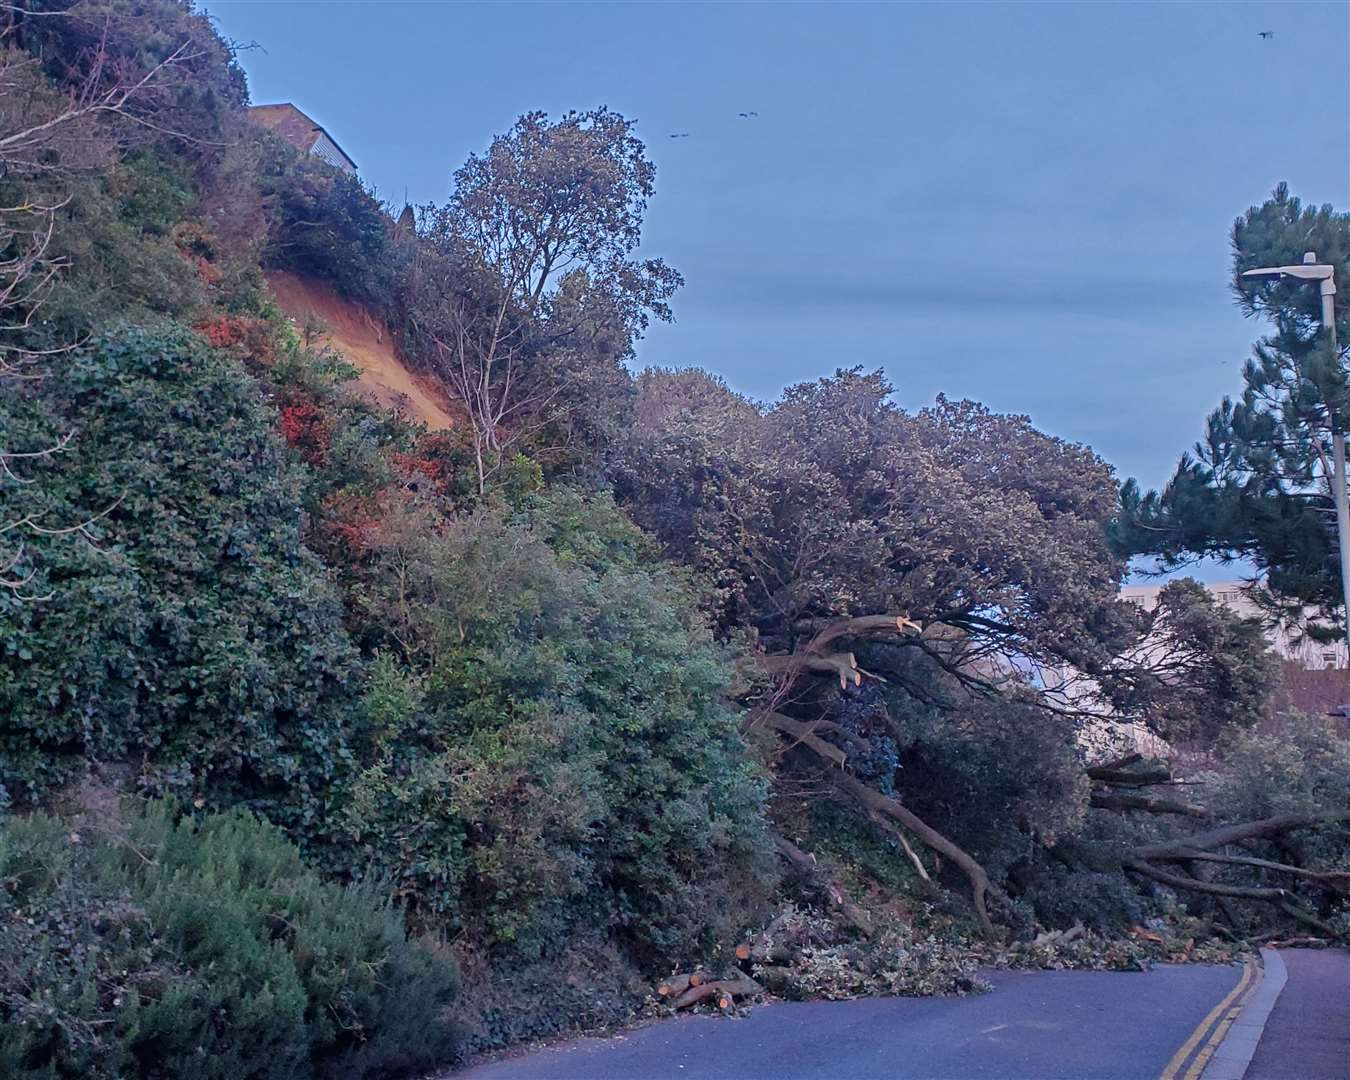 The Road of Remembrance in Folkestone has been blocked by a landslide and fallen trees. Picture: Michael Stainer